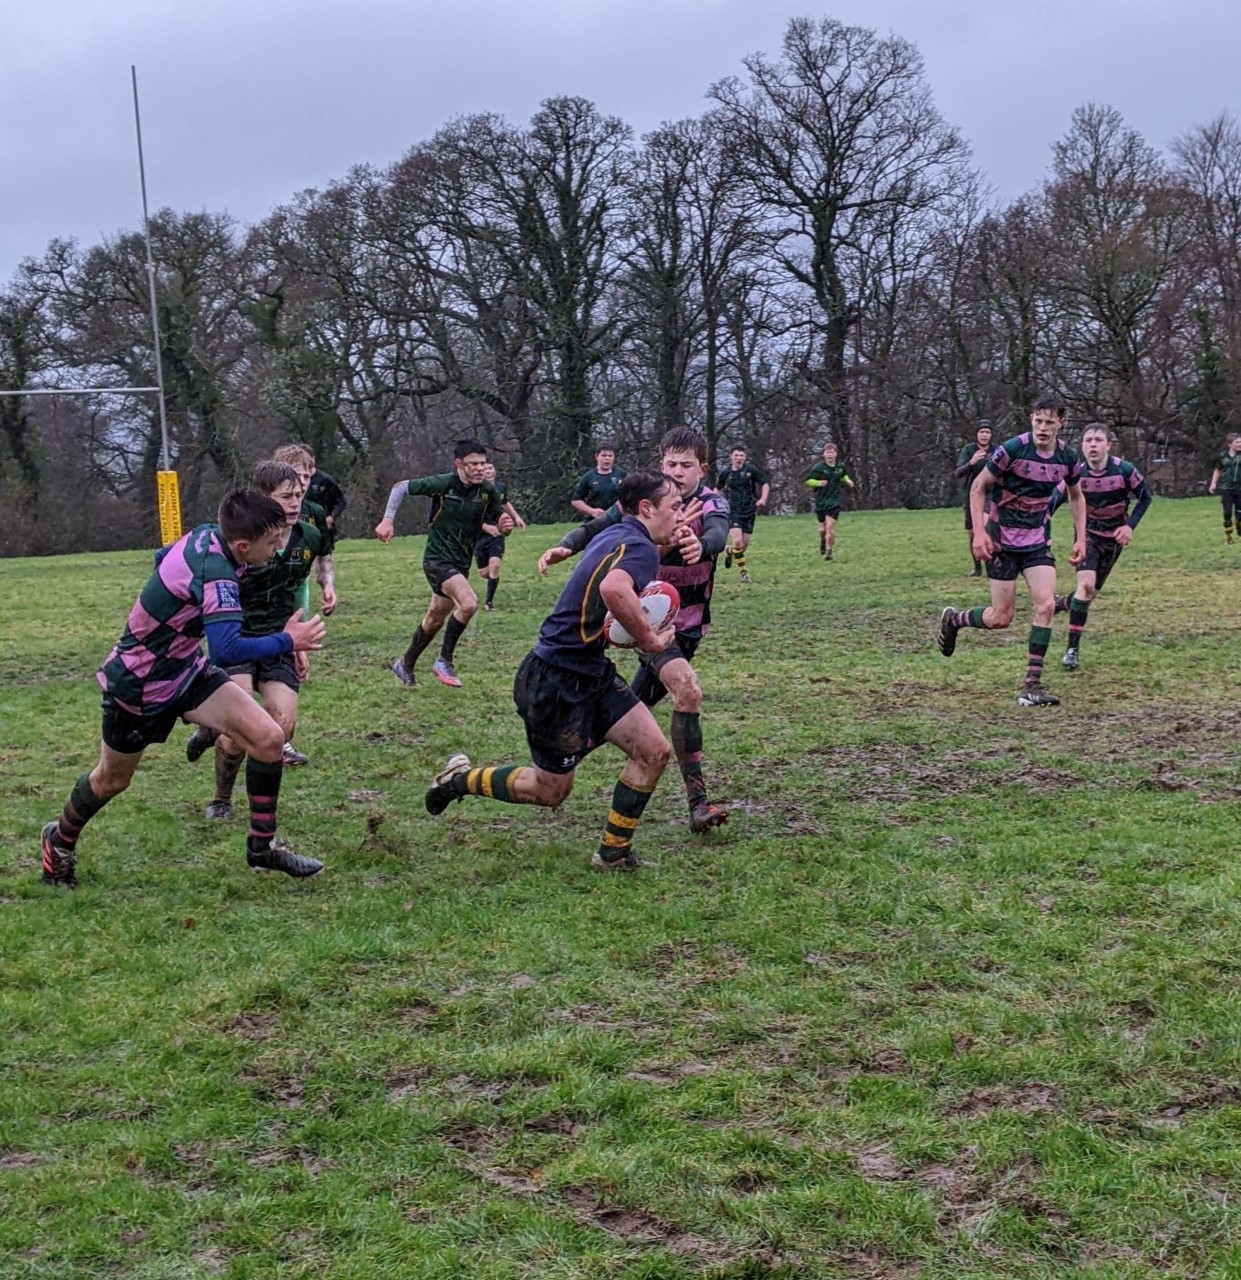 Helensburgh Rugby Club’s youth section is in rude health, according to Ian Smith - though the hunt for more players, and more parental involvement, is never-ending (Photo - Melody Grayson)